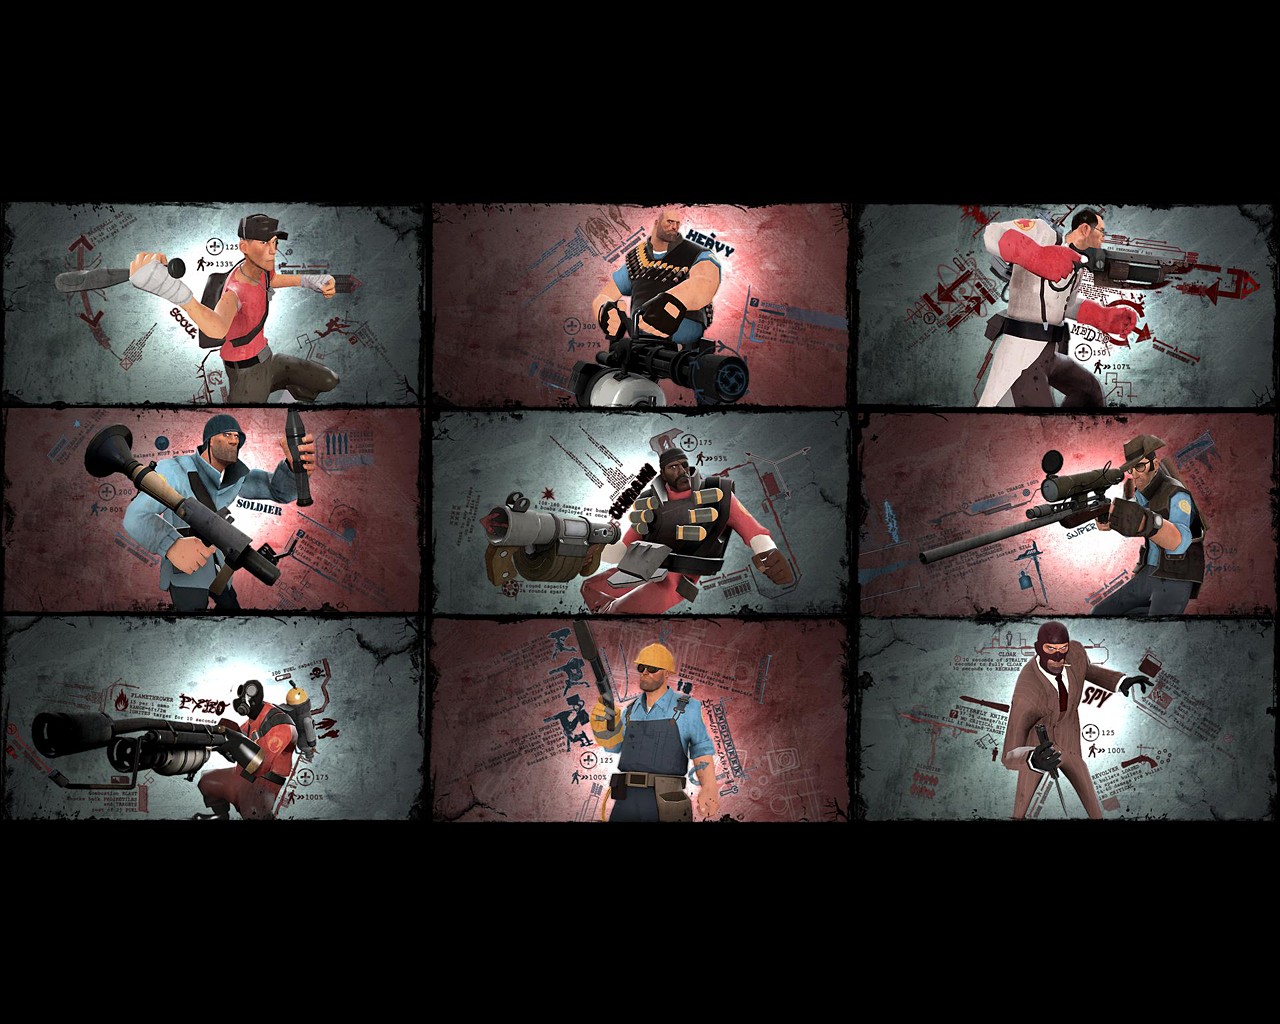 Video Games Team Fortress 2 Medicine Sniper TF2 Heavy Charater Pyro Character Spy Character Soldier  1280x1024